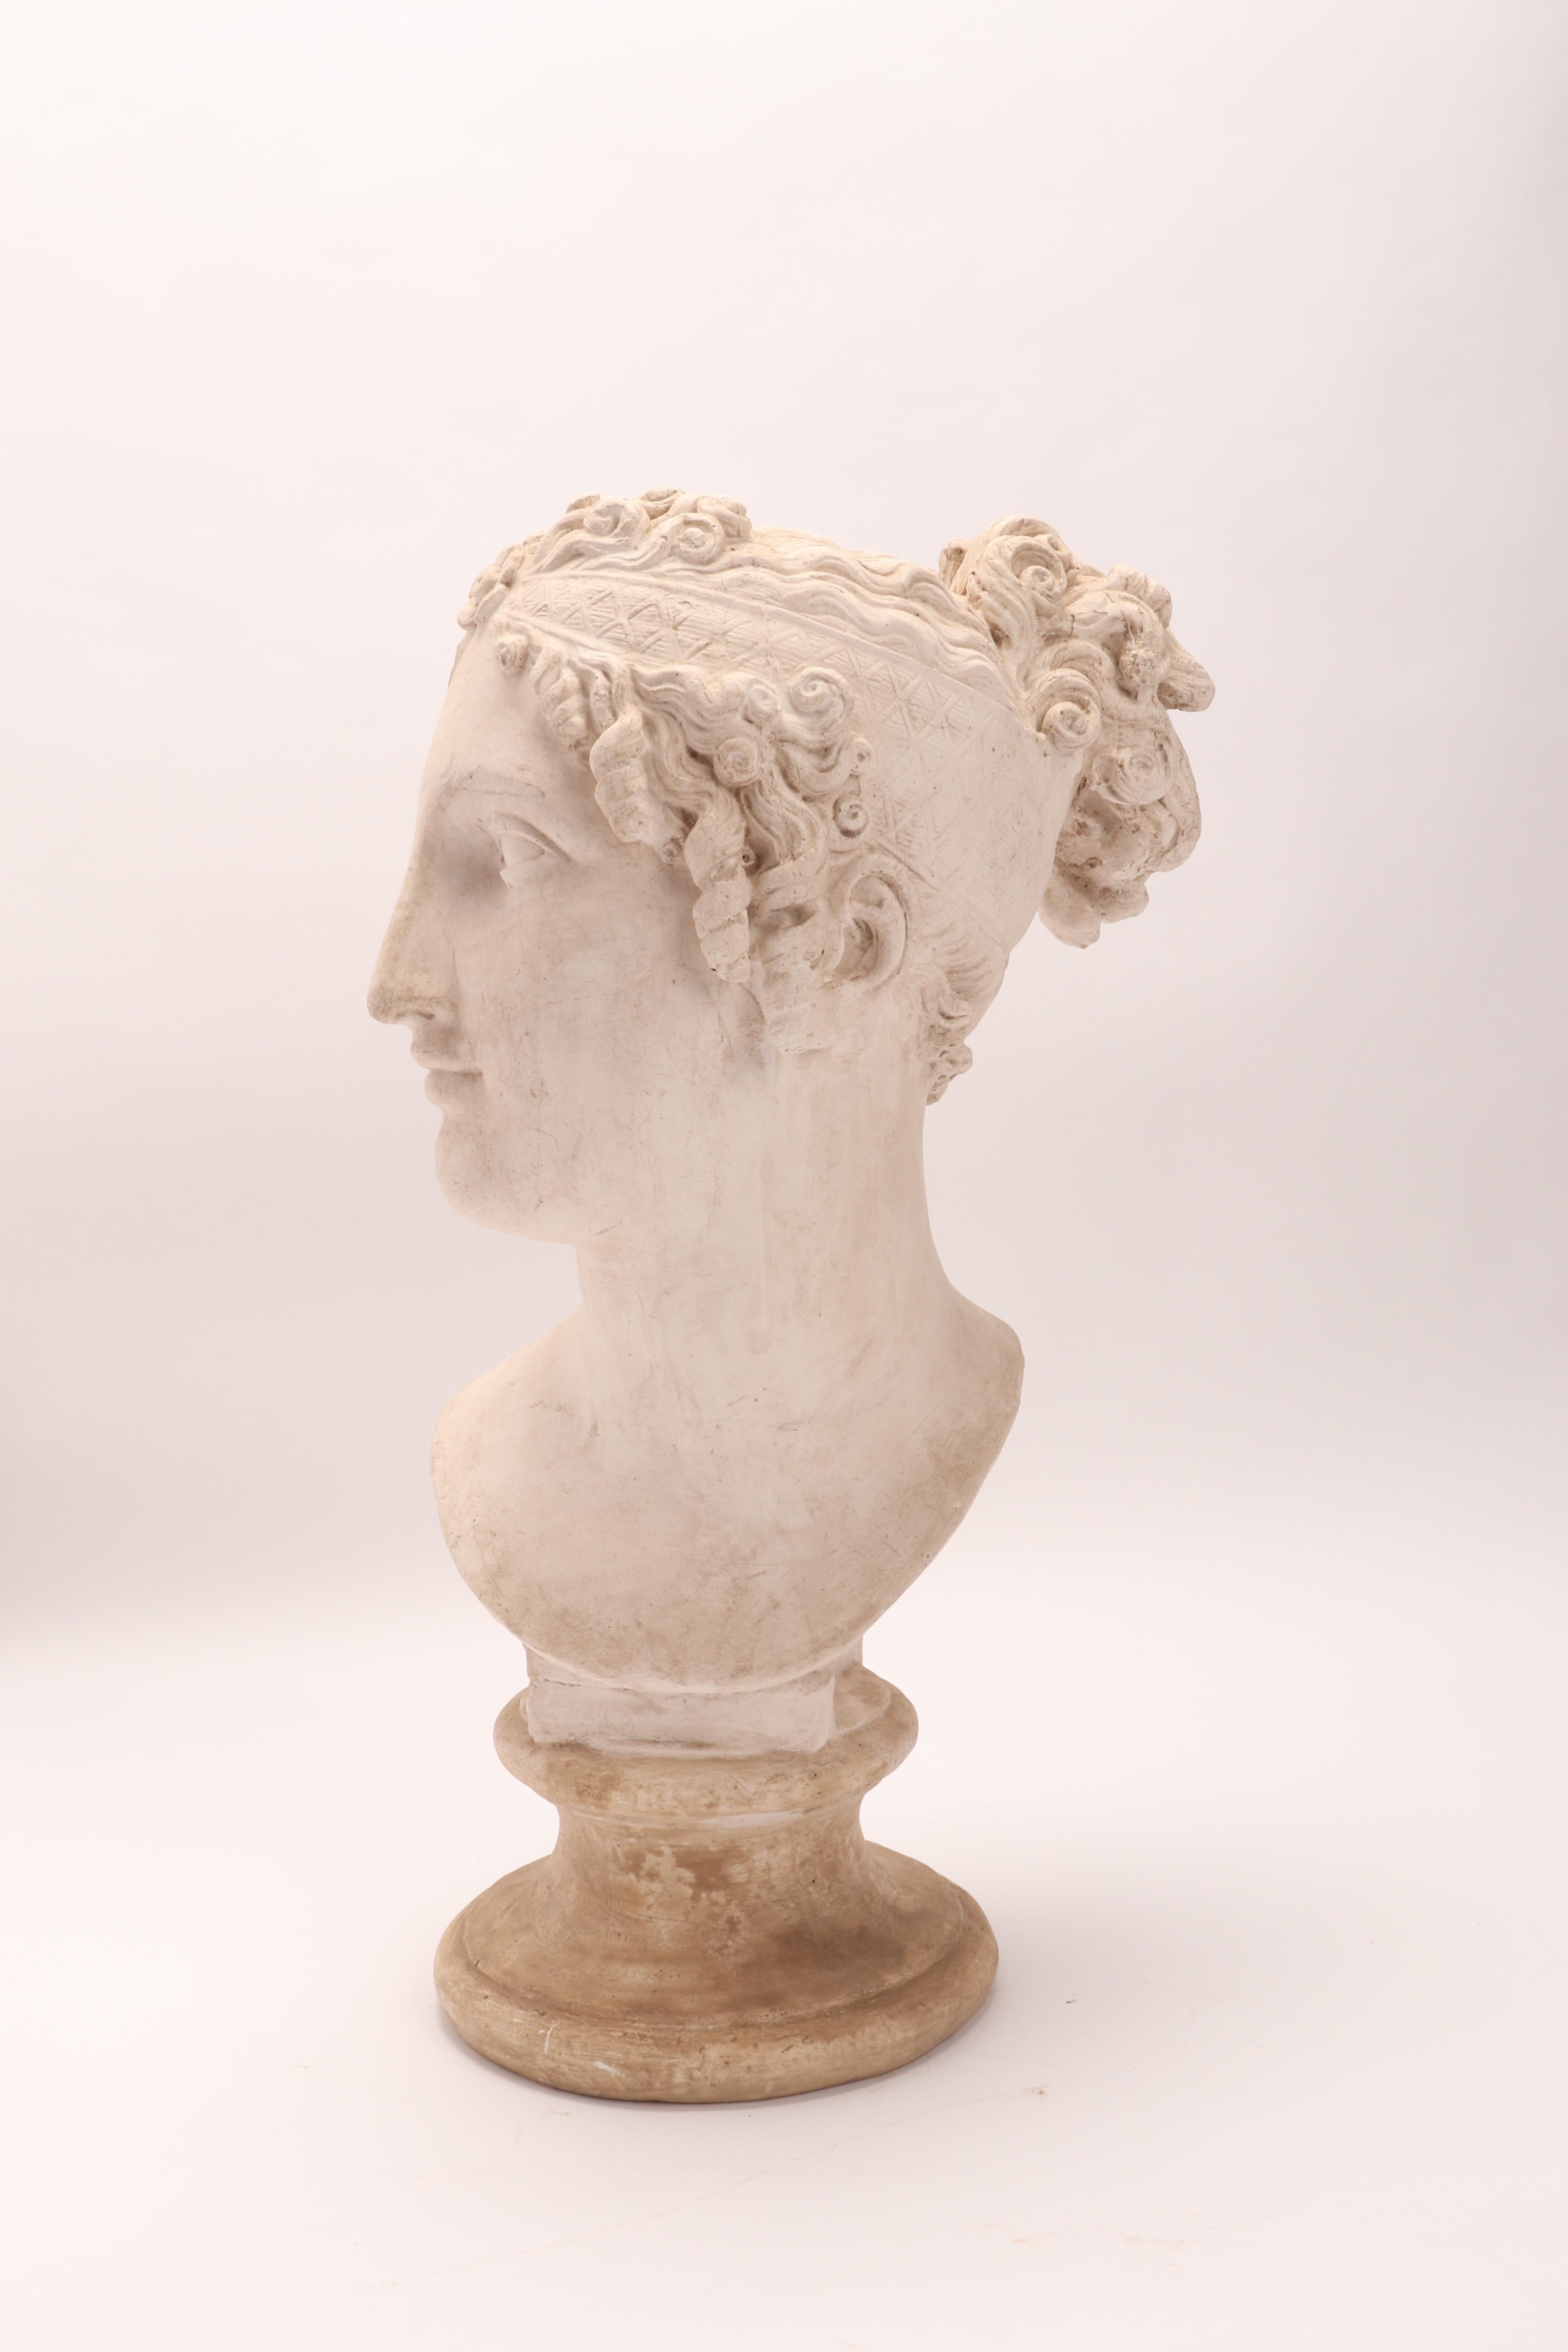 Above the plaster base, there is a plaster cast of a woman's head, a neoclassical portrait. A cast for the teaching drawing in the academy, Italy, circa 1890.